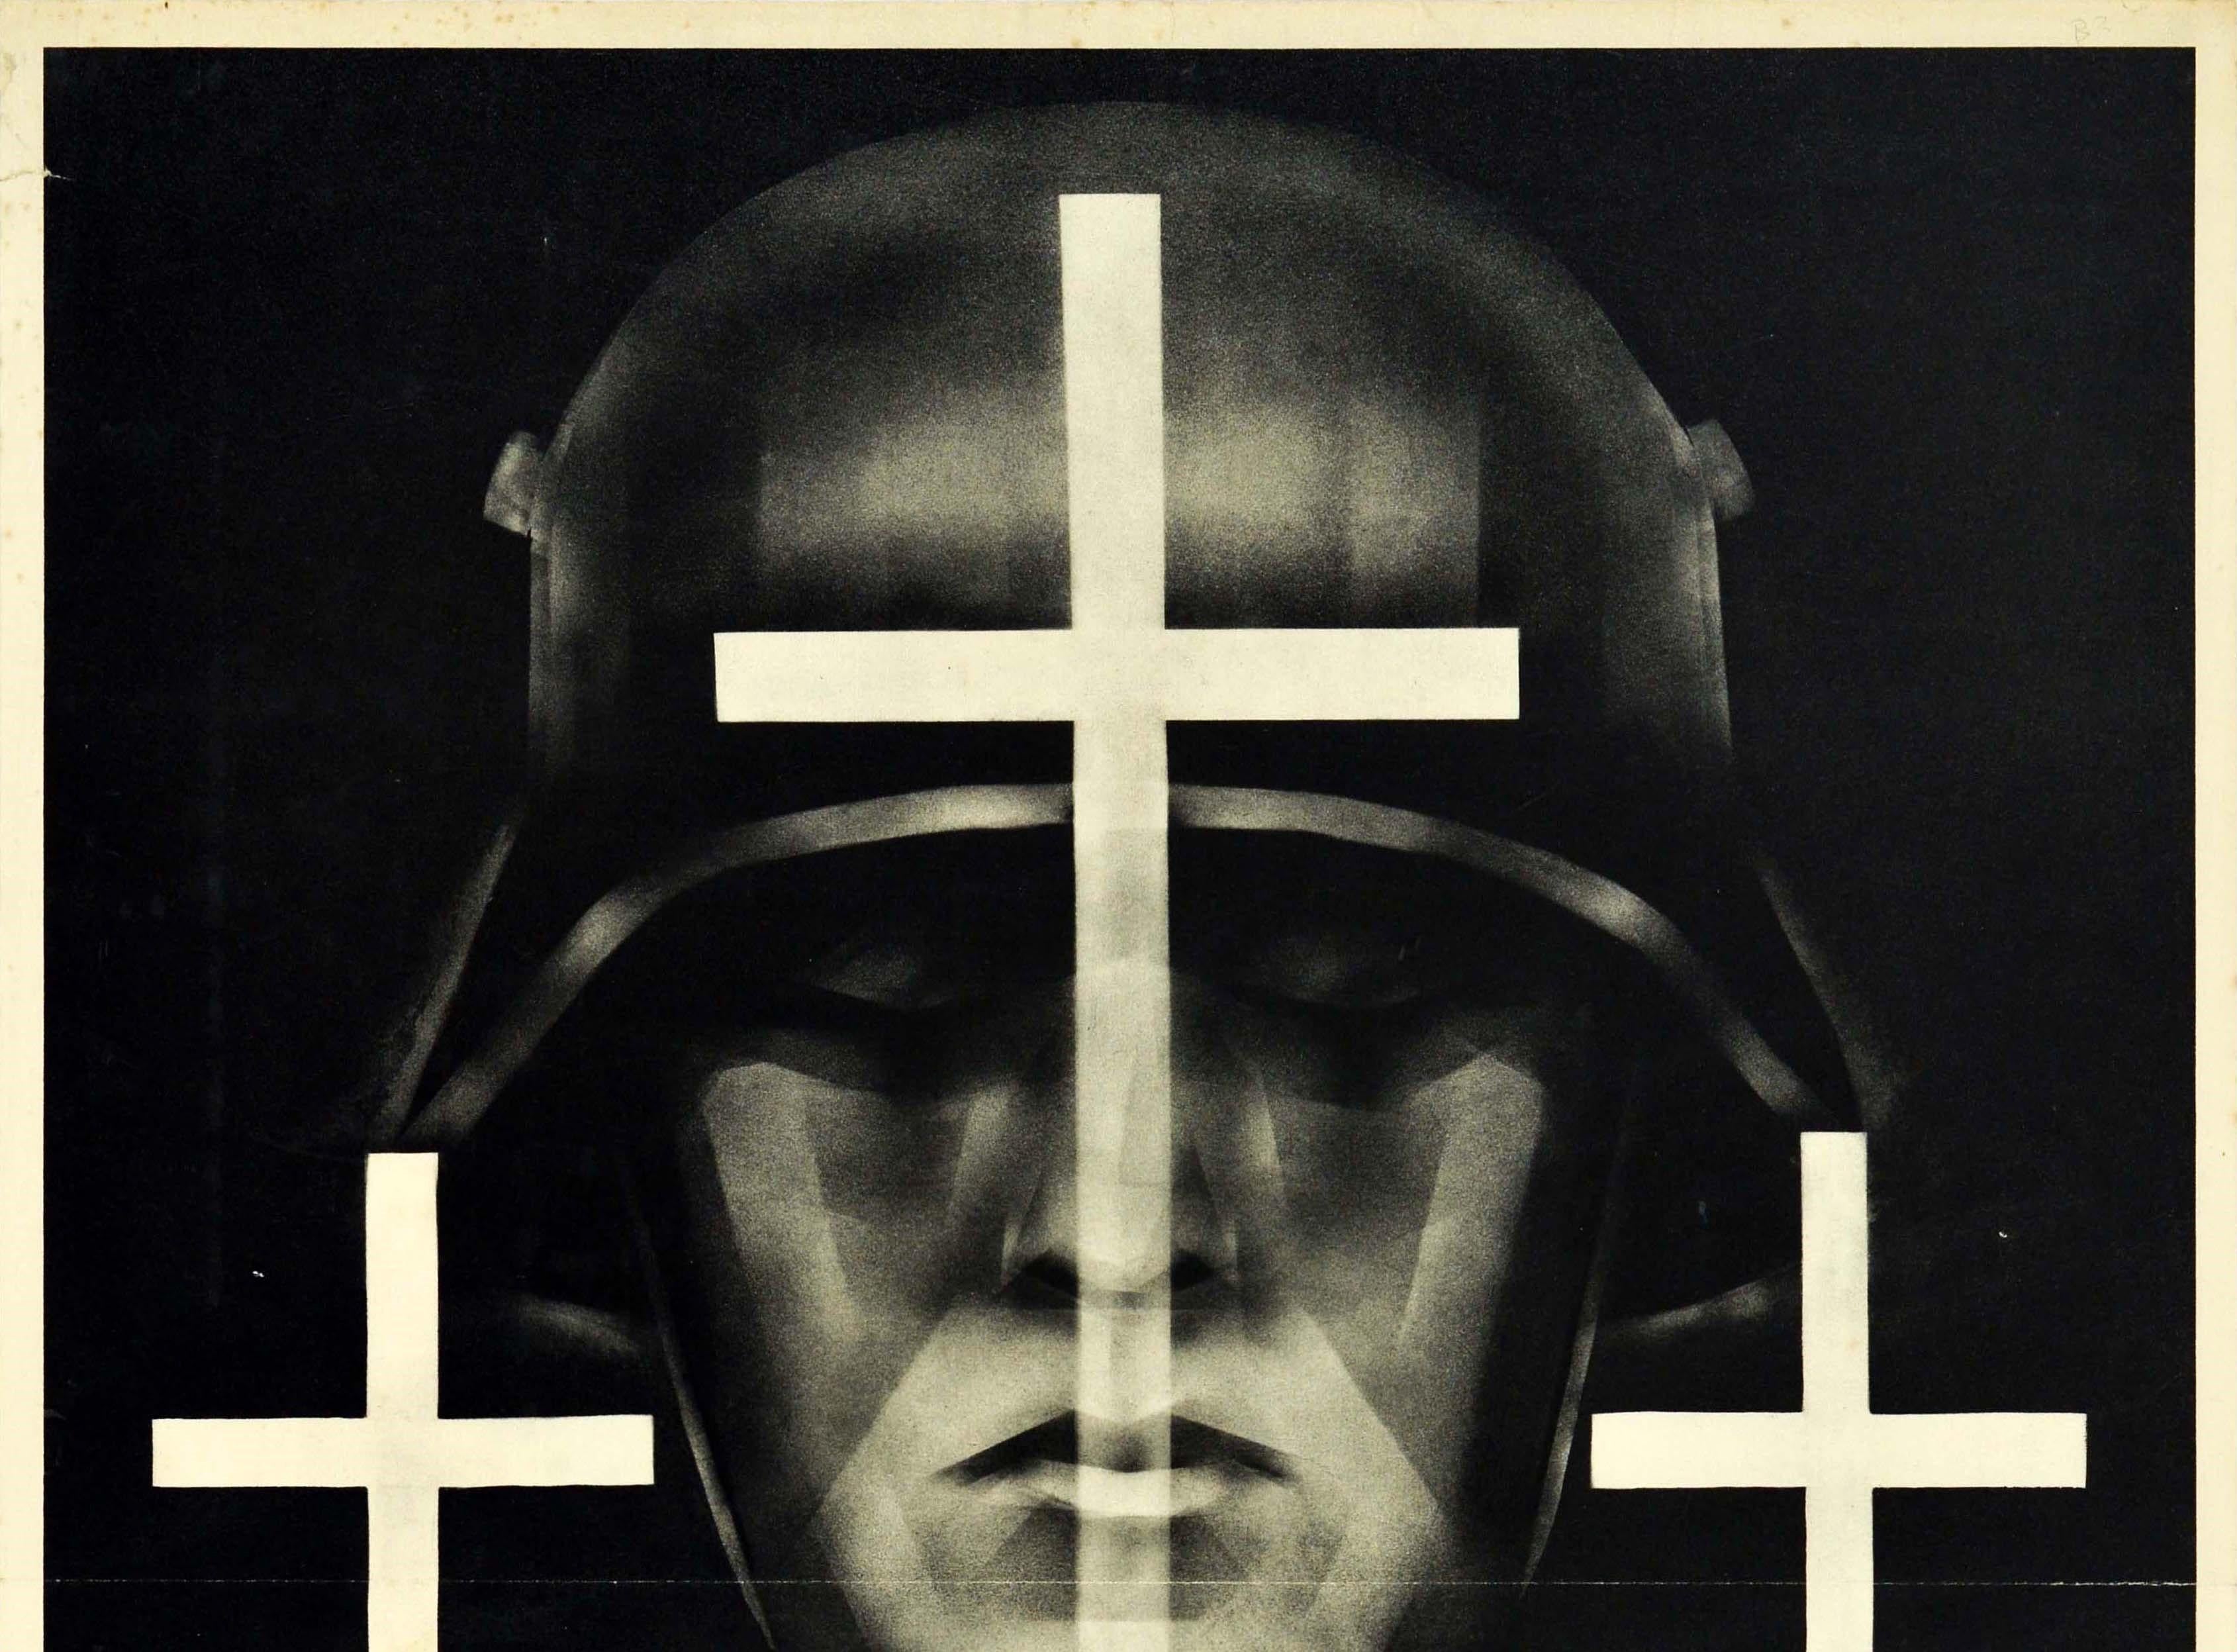 Original vintage poster issued by the German War Graves Commission - Ehret die Heldengraber
Opfert am 20. und 21. Oktober / Honour the graves of war heroes Offertory on 20 and 21 October - featuring an image of a soldier in a military helmet in